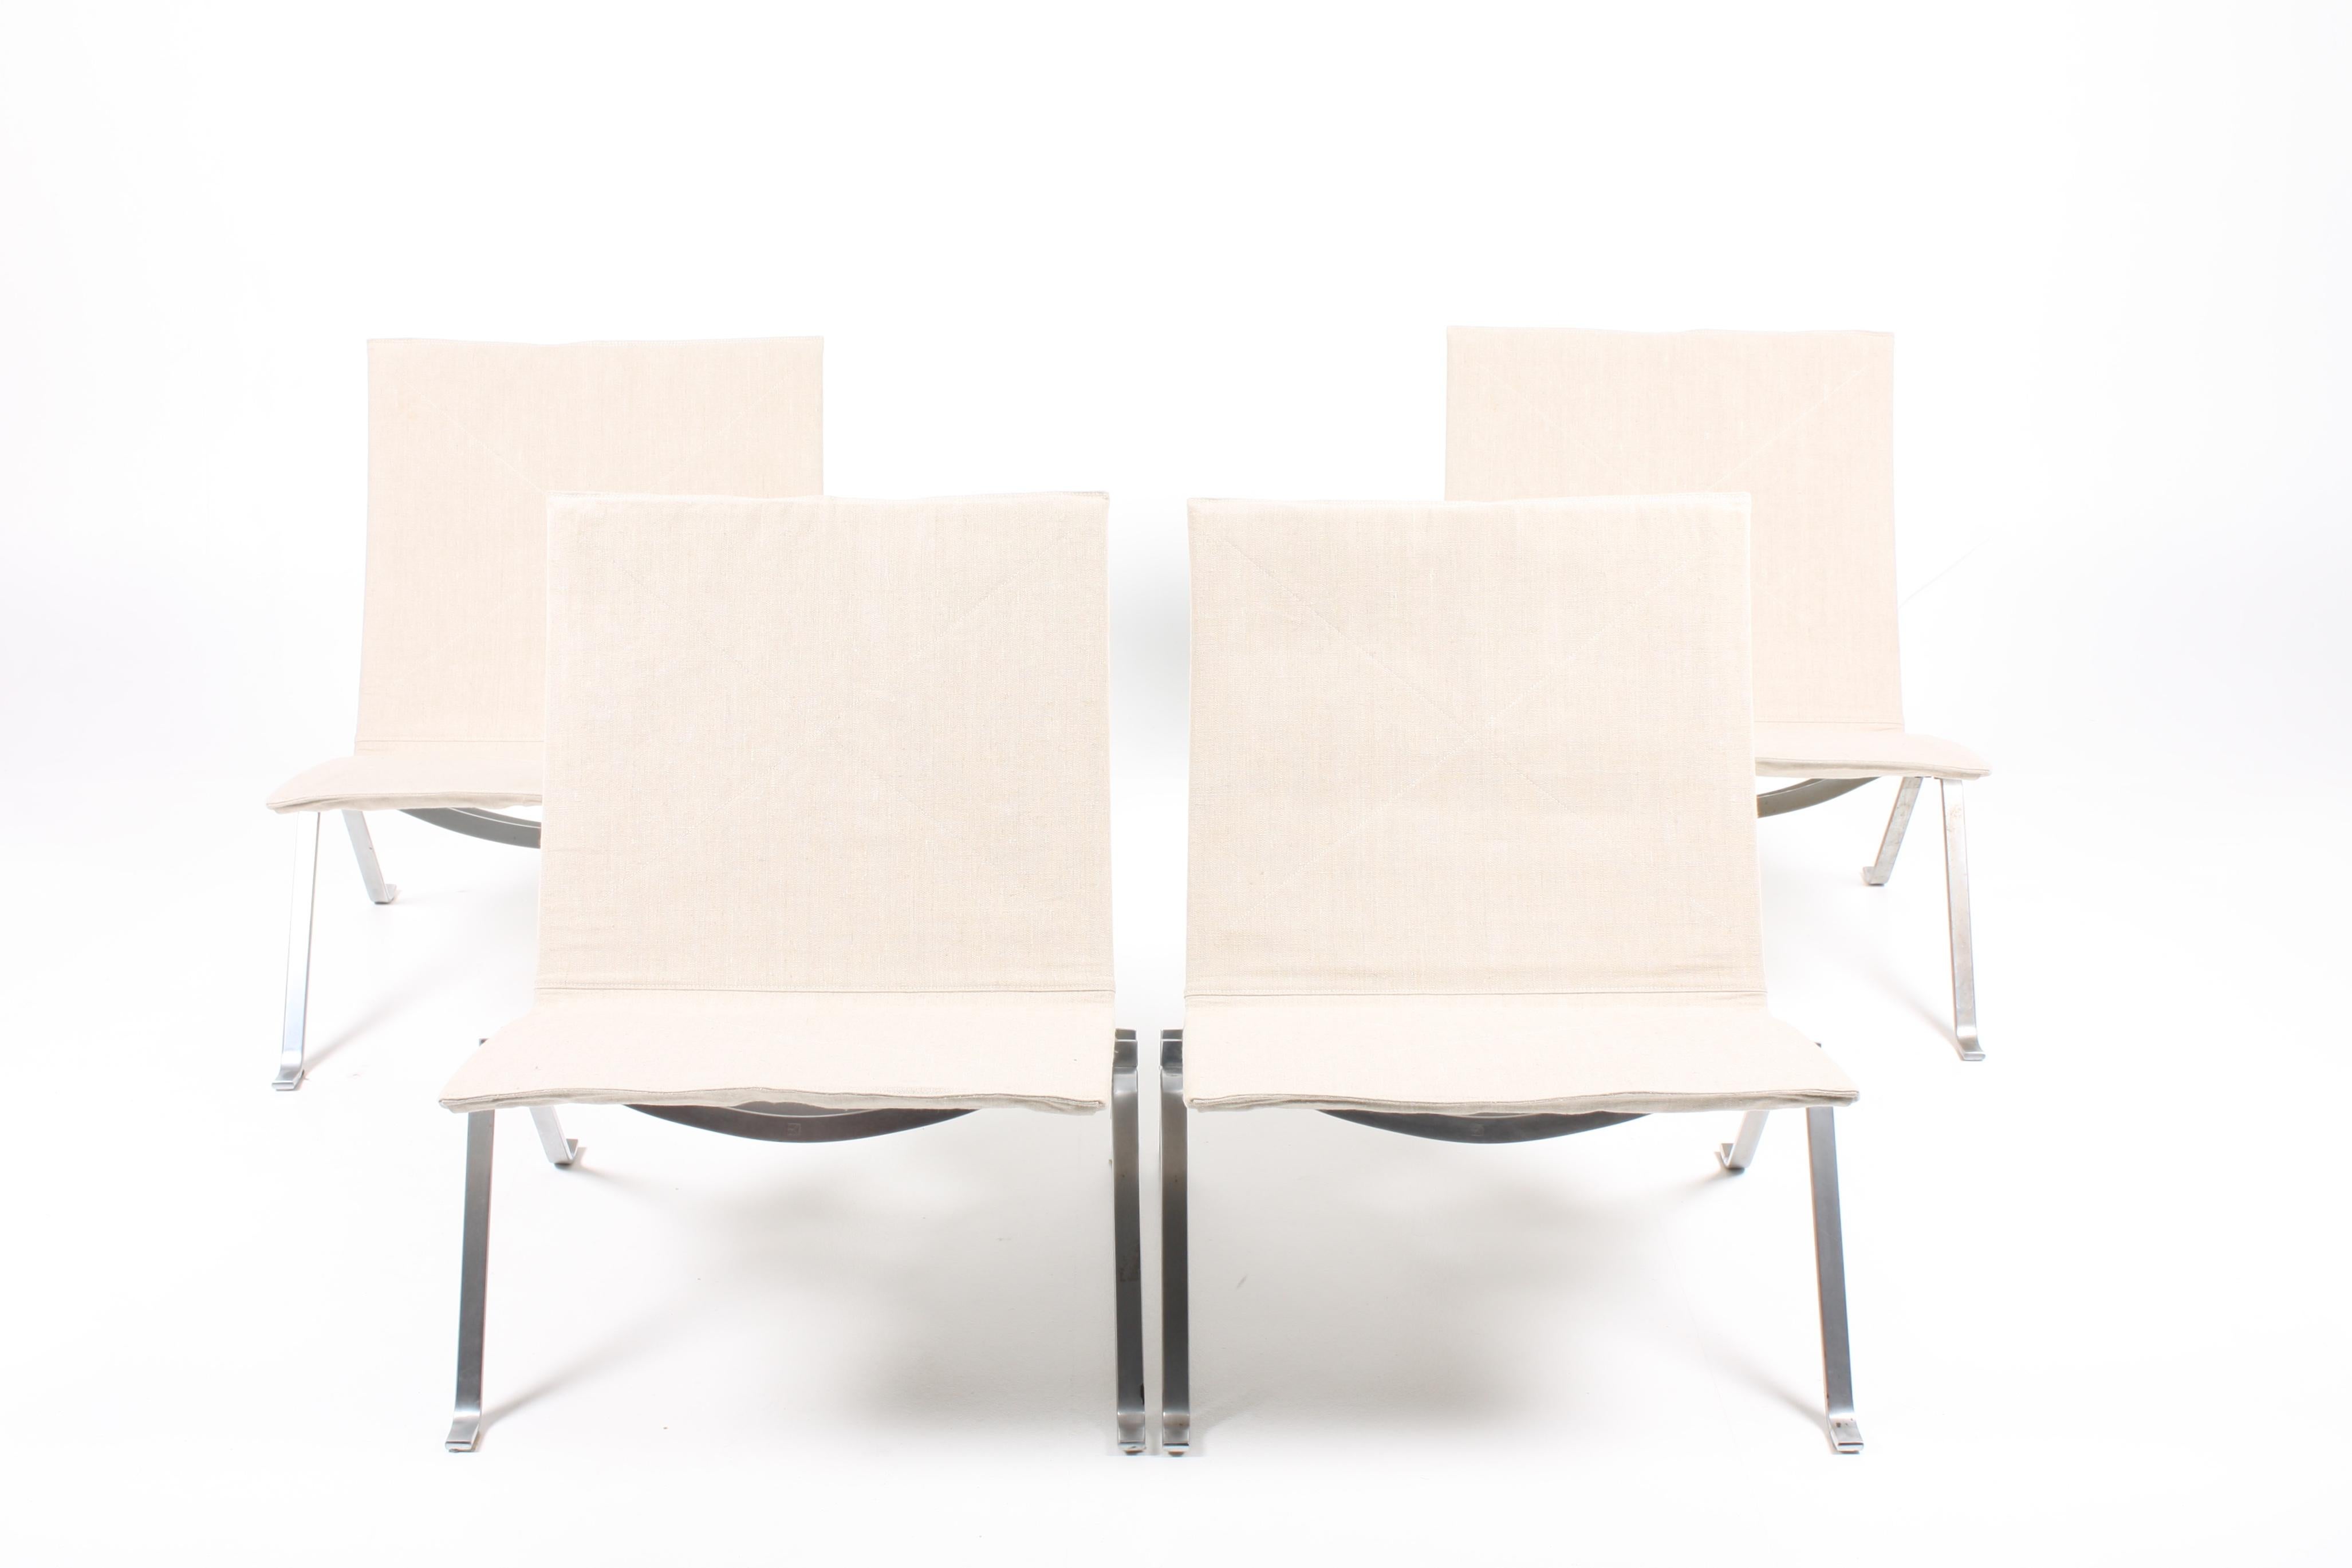 Group of Four Midcentury PK22 Lounge Chairs in Canvas by Kjærholm, Danish Design 2